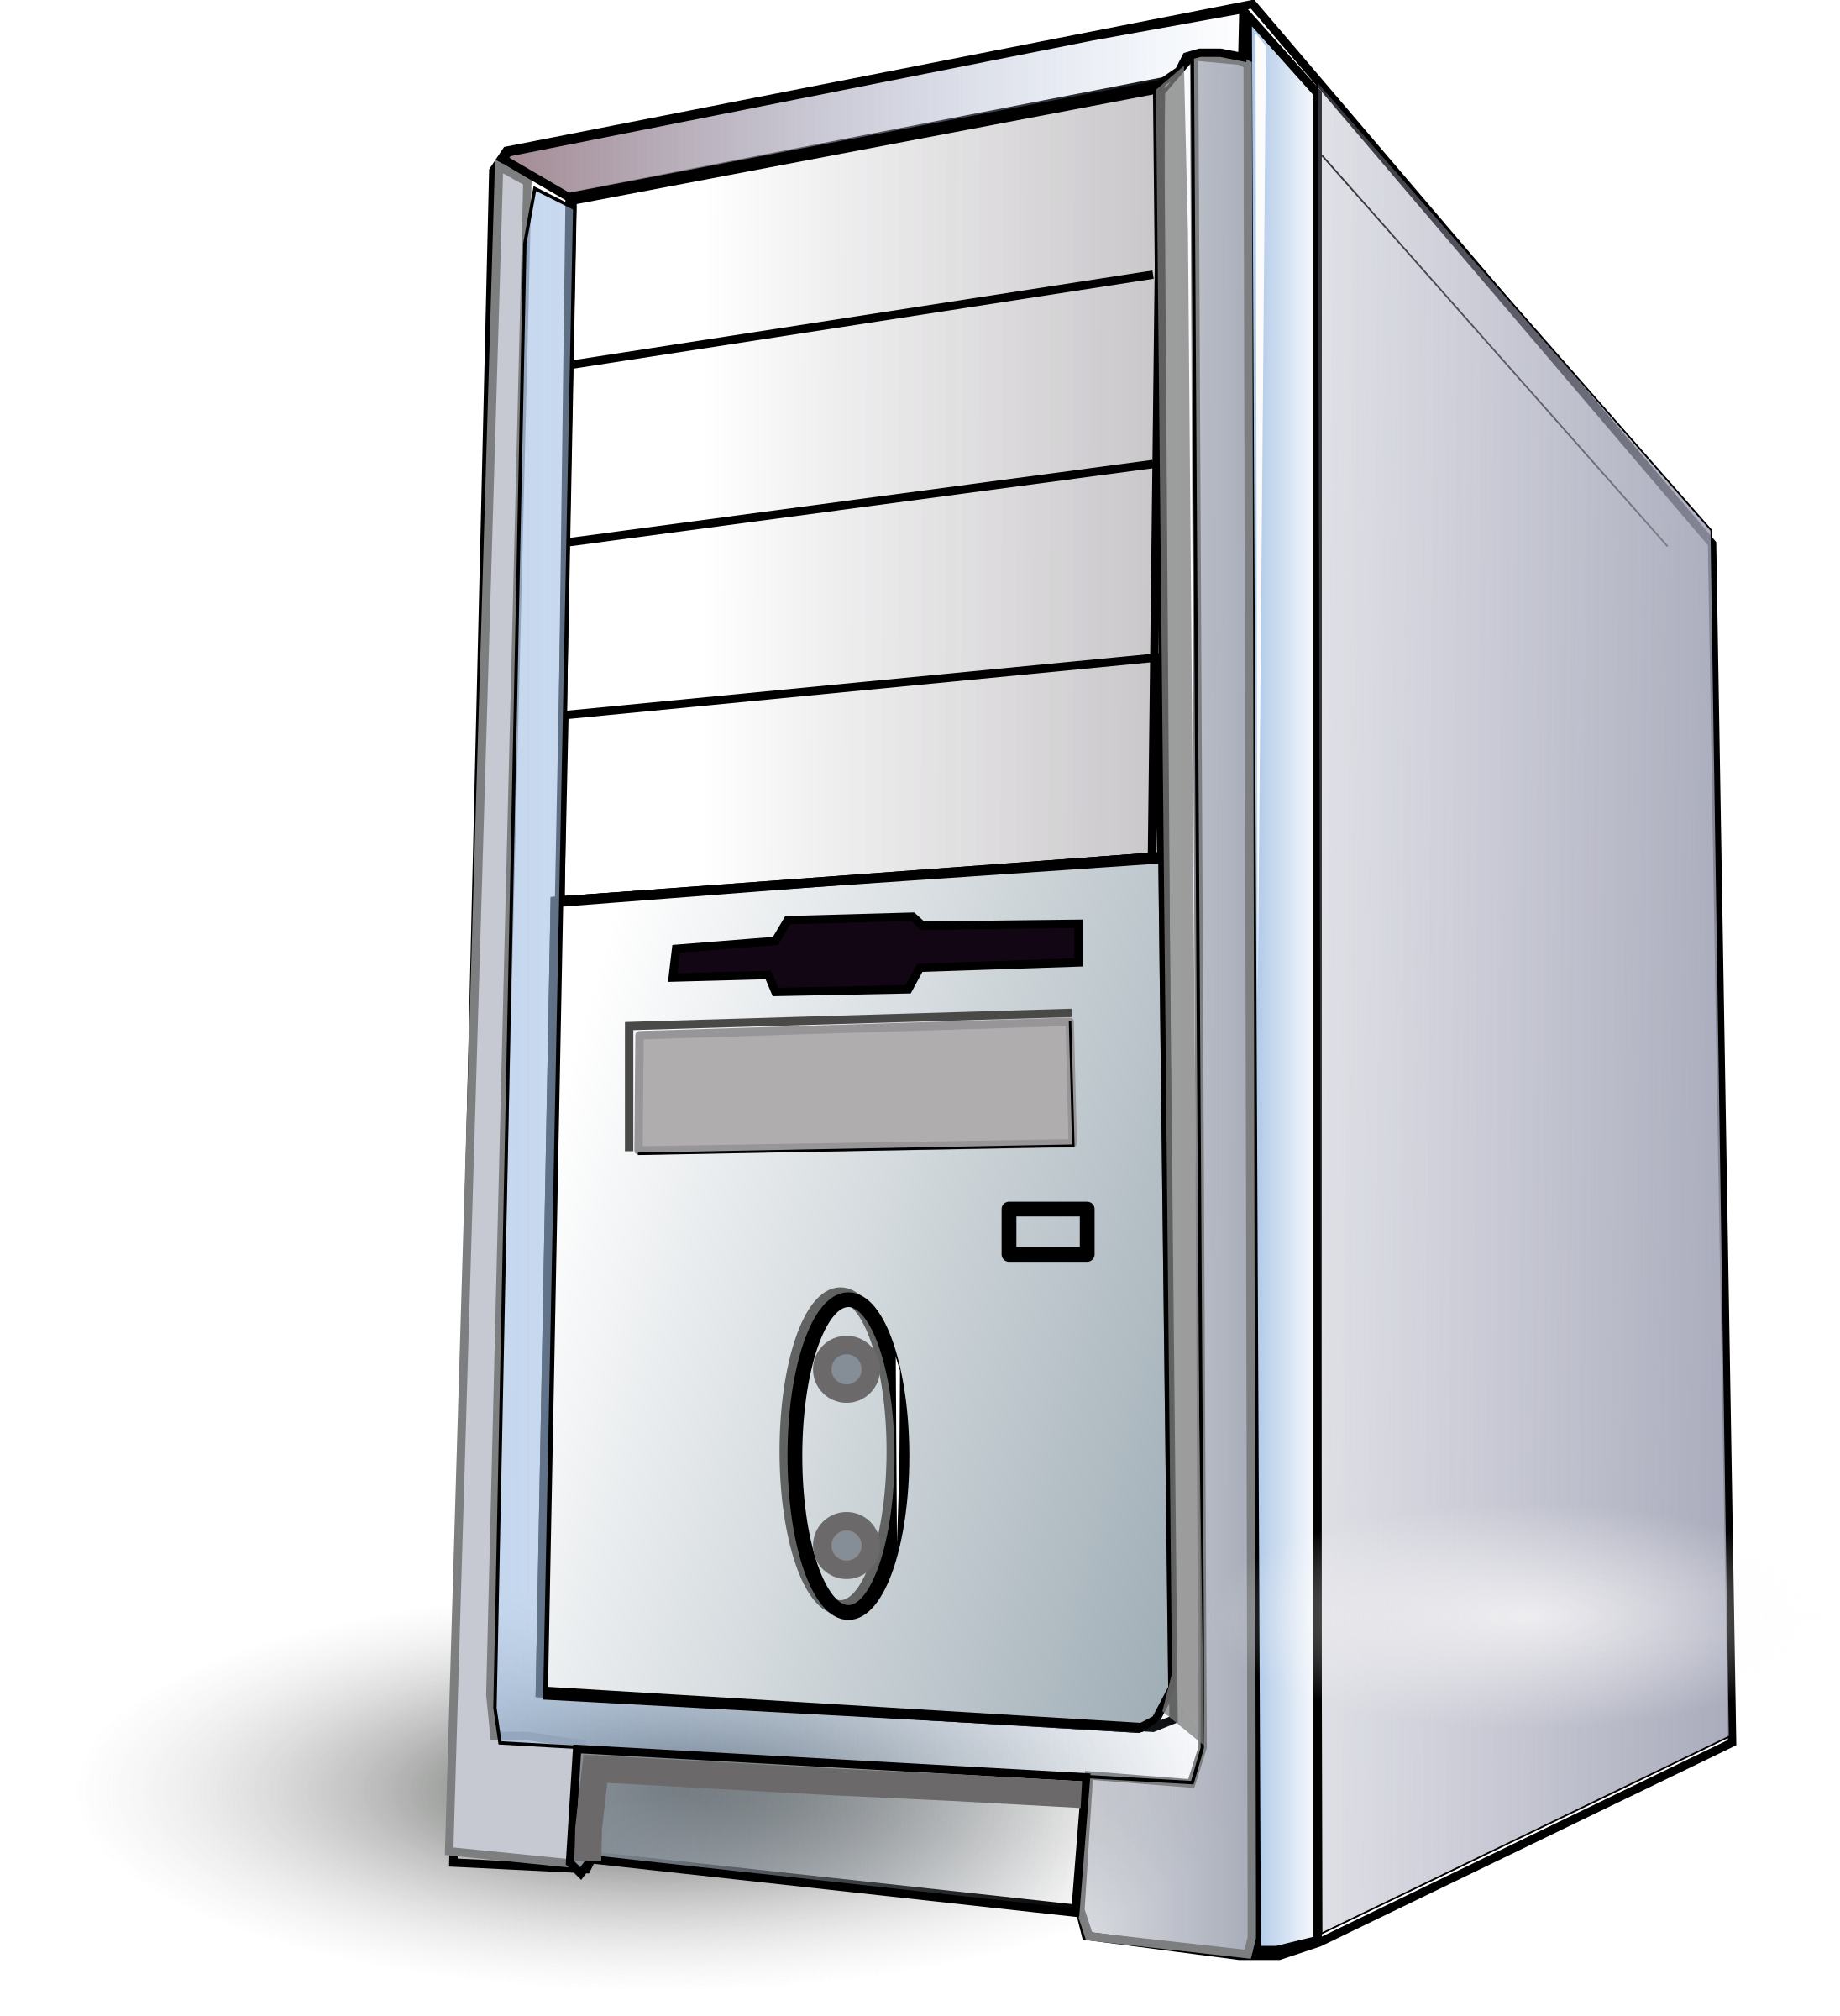 pc clipart computer information